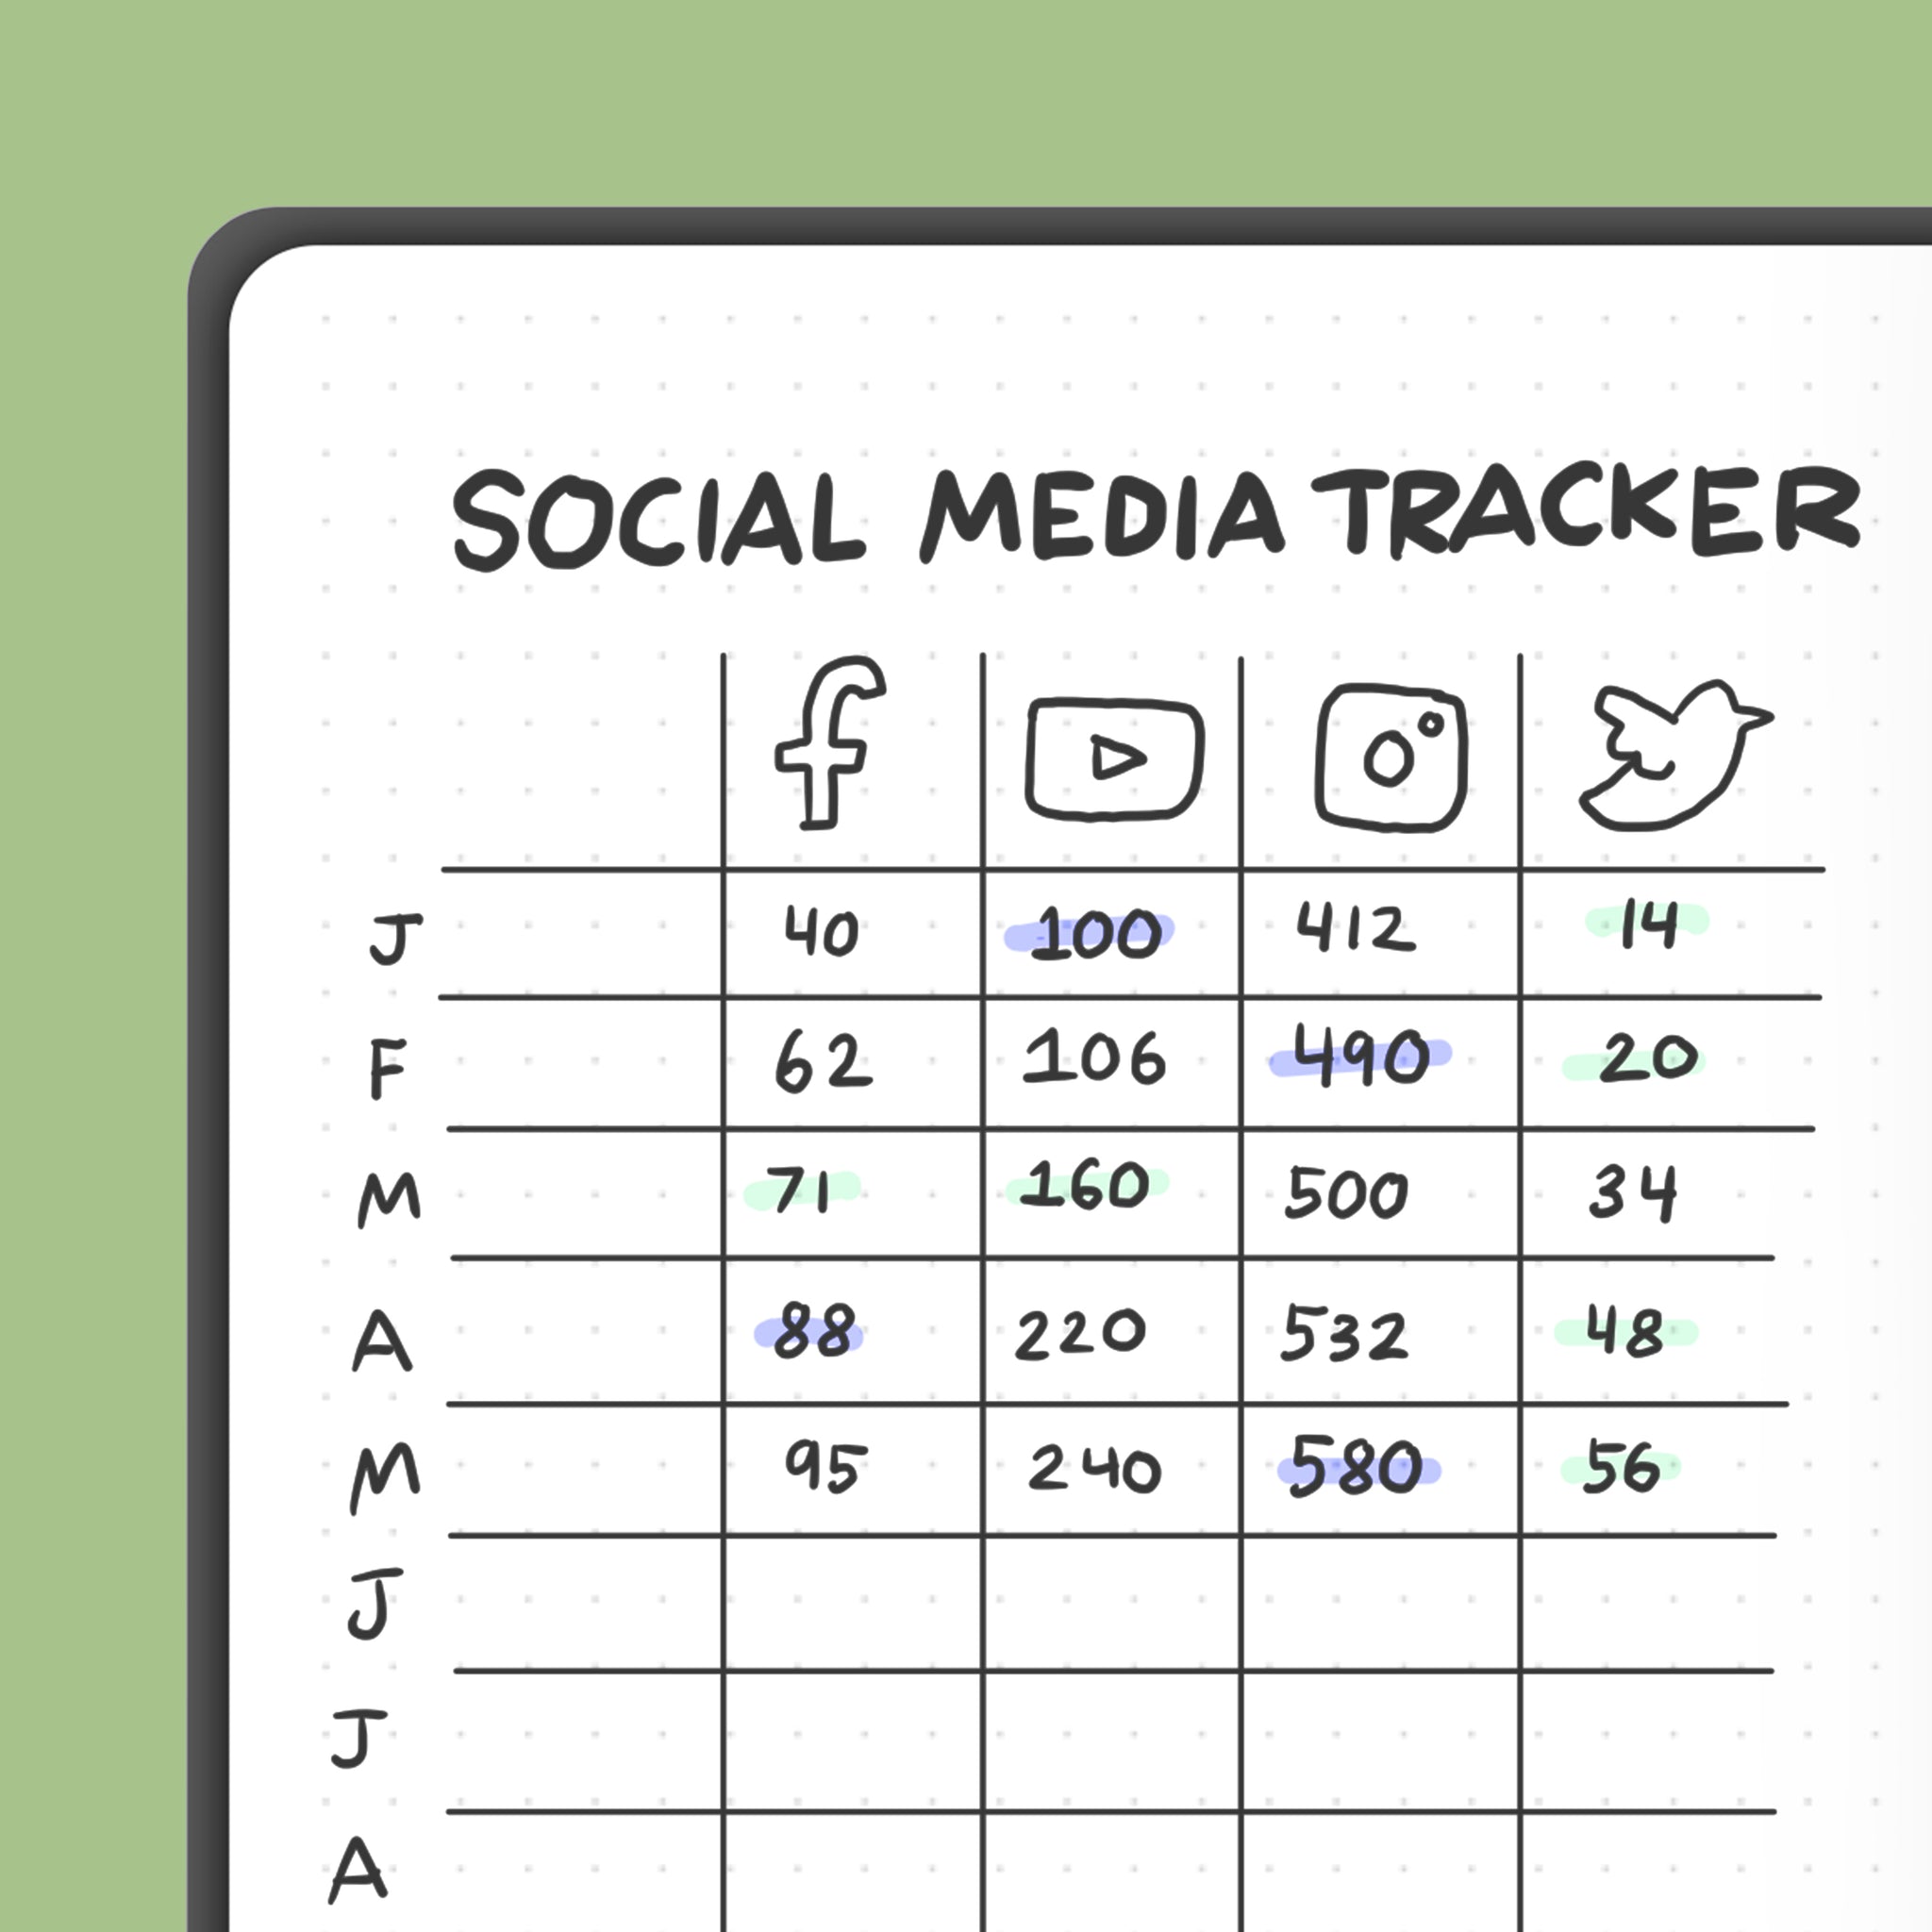 Create a Social Media Tracker in your dotted pages to track engagement on your Social Media pages. You can do this by making a table, the rows by month, and columns by media platform (YouTube, Facebook, Instagram, etc.). 